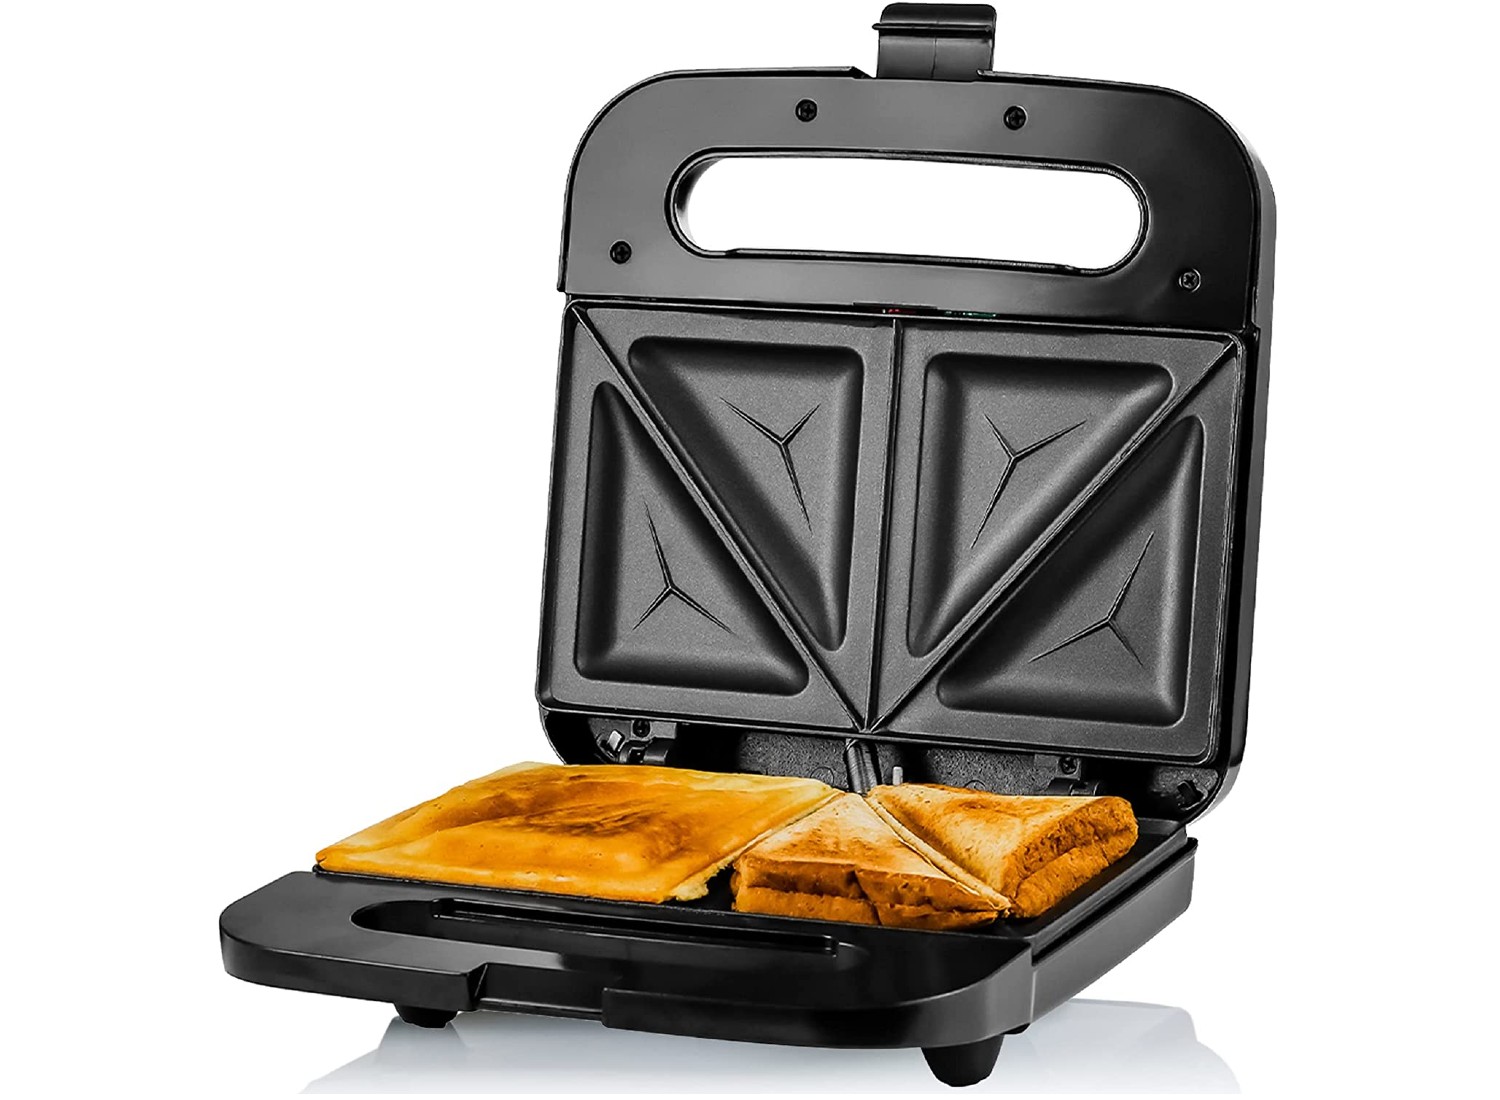 Kitchen gadgets review: sandwich maker – the Egg McNuffin